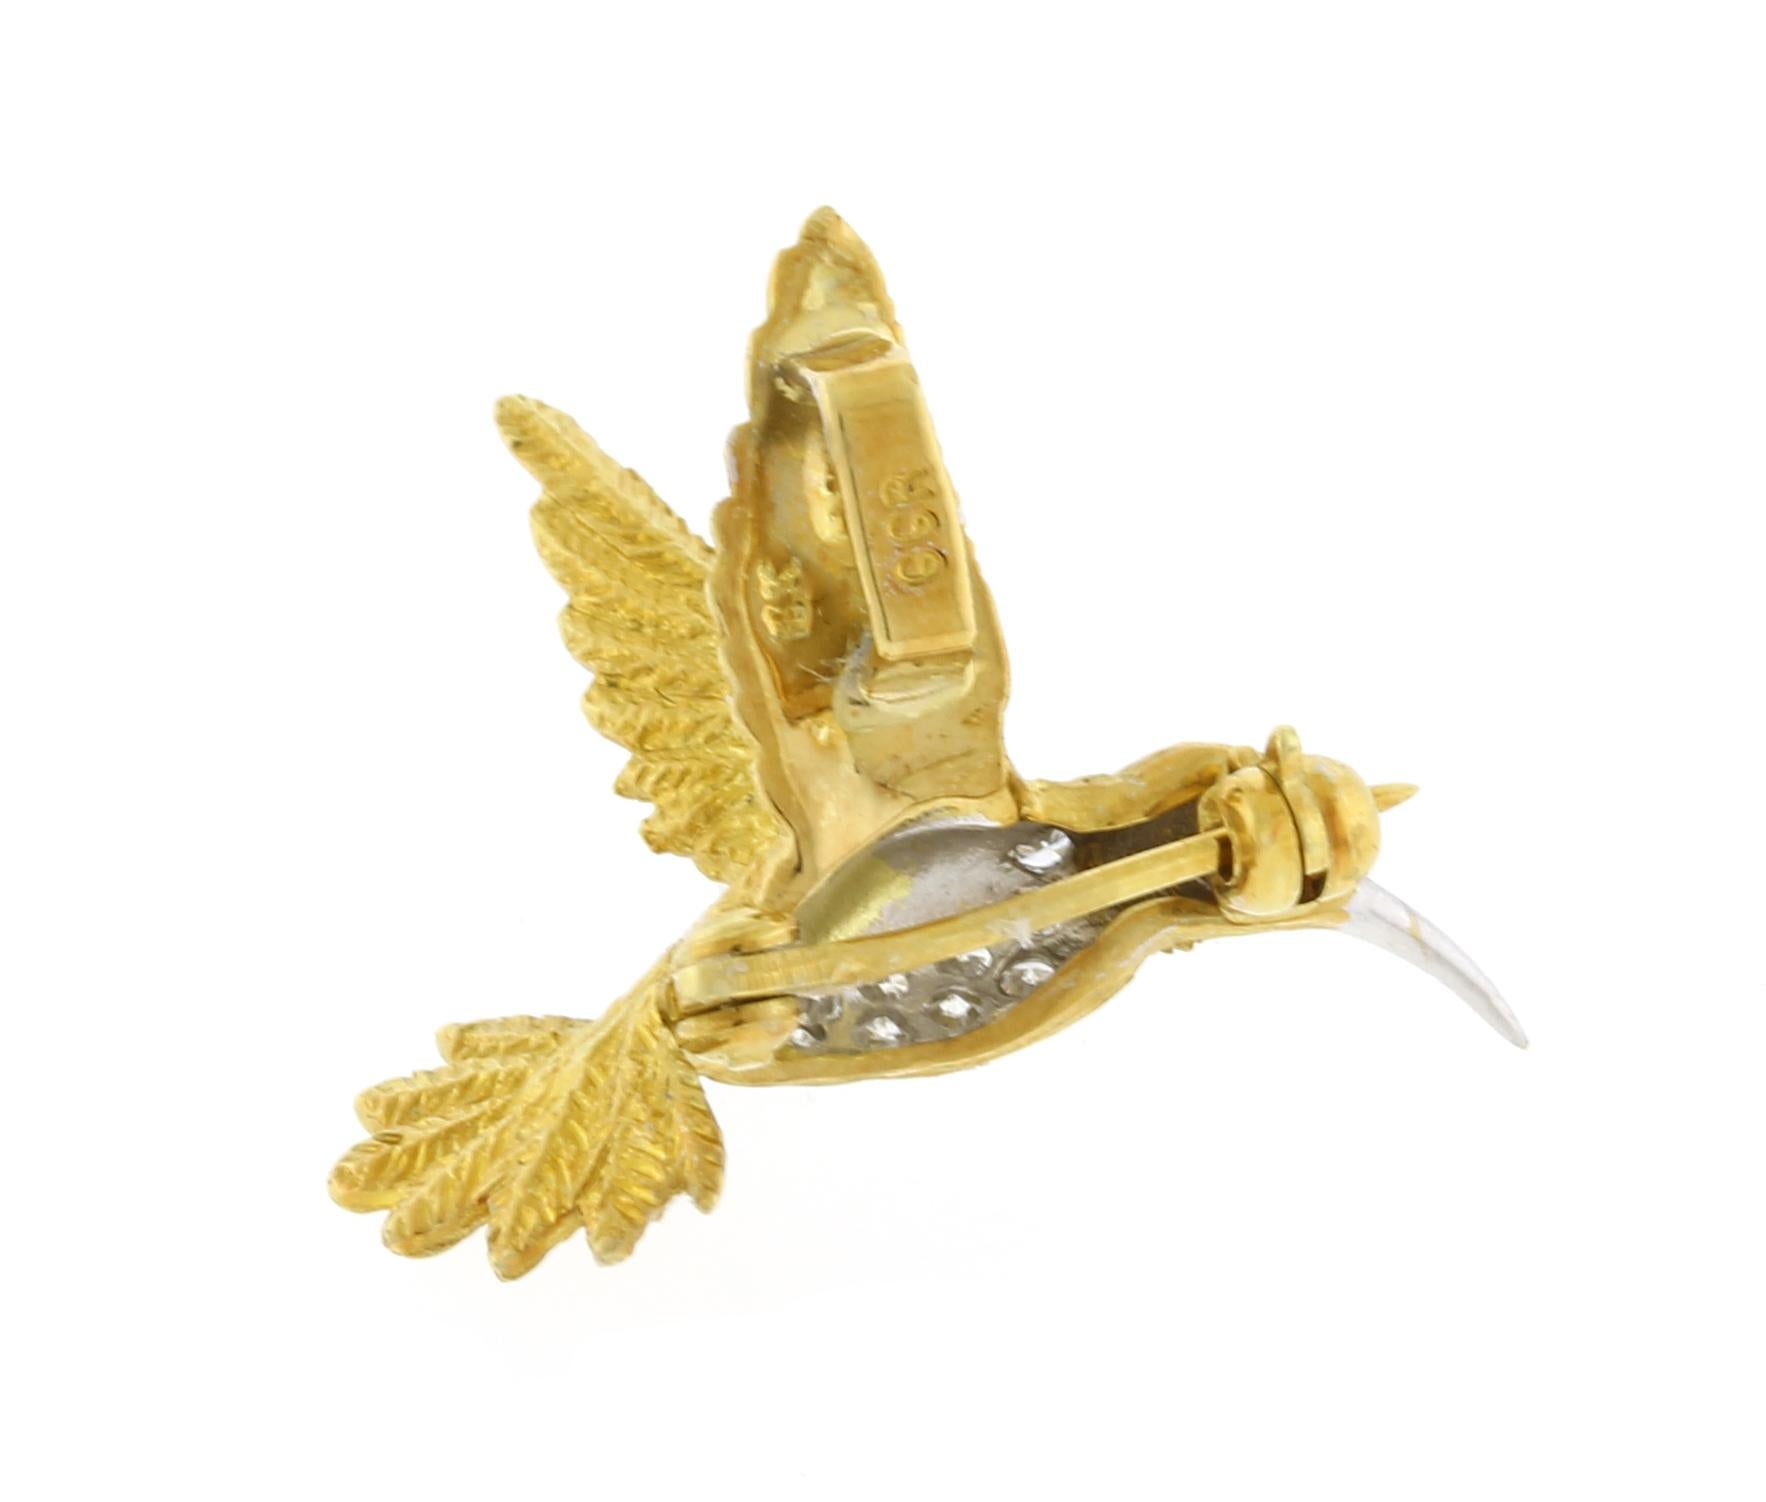 This cute brooch is yellow and white gold and can be wore for any occasion. 
♦ Metal: 18 karat
♦ Gemstones: Ruby and Diamonds
♦ Diamonds: 9=.09carats
♦ Weight: 3.7 grams
♦ Dimensions: 7/8in by 7/8in
♦ Packaging: Pampillonia Presentation Box
♦